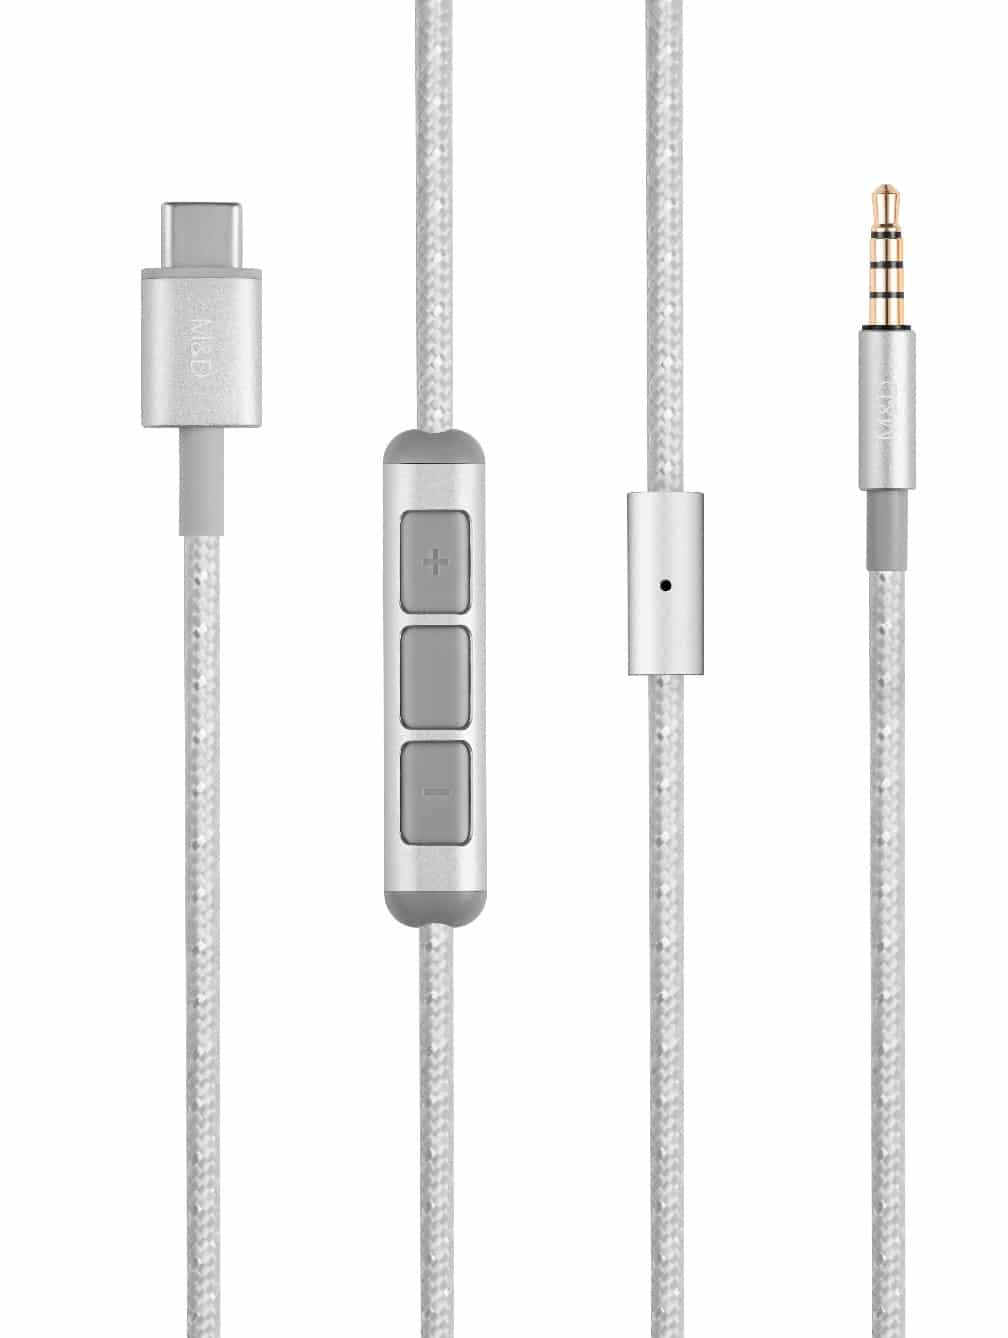 Lightning and USB-C cables: Master & Dynamic